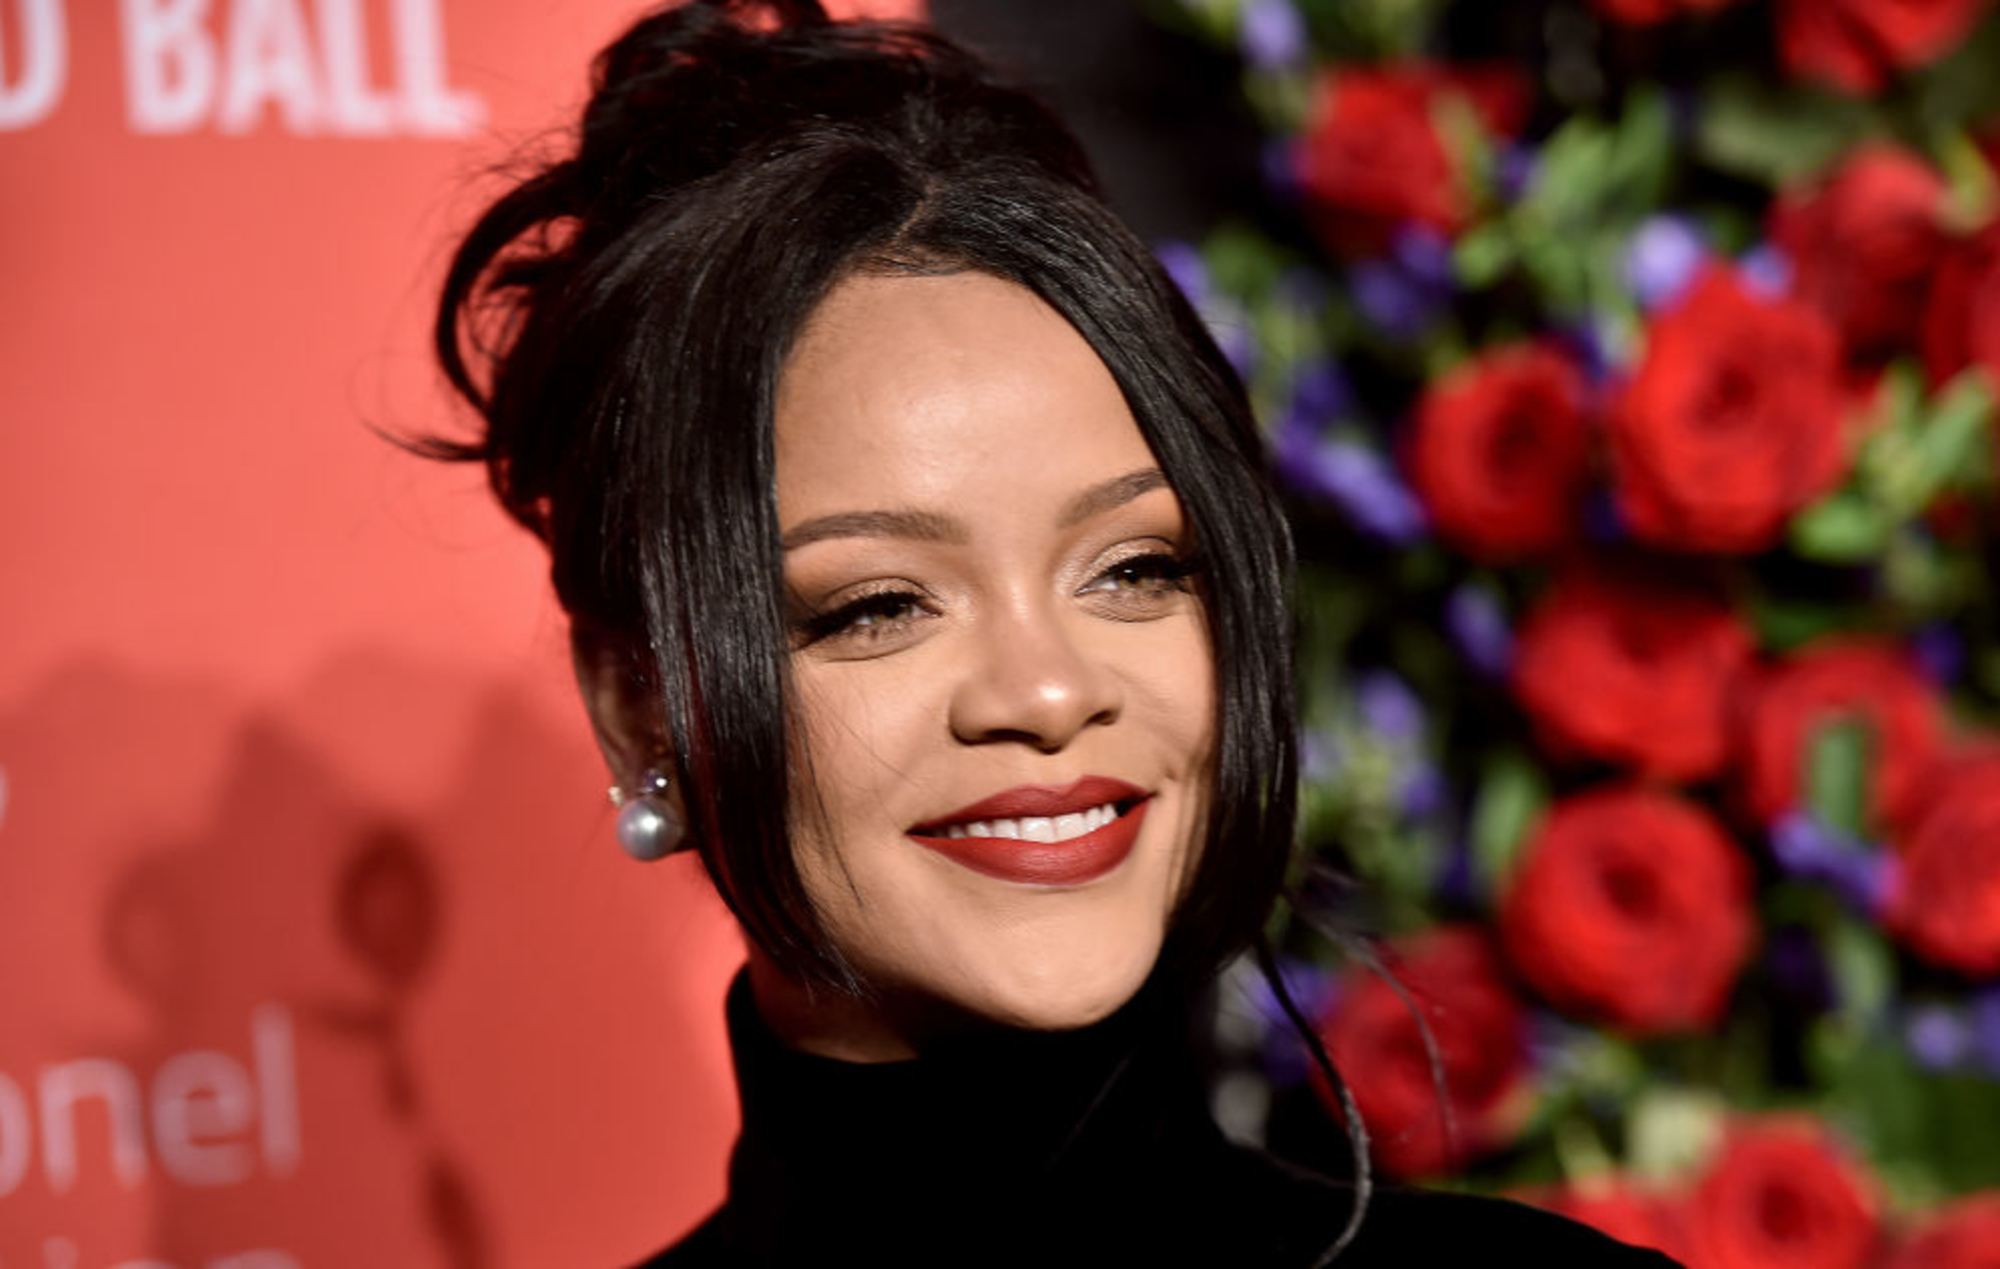 Rihanna under fierce criticism for using Islamic hadith in lingerie show